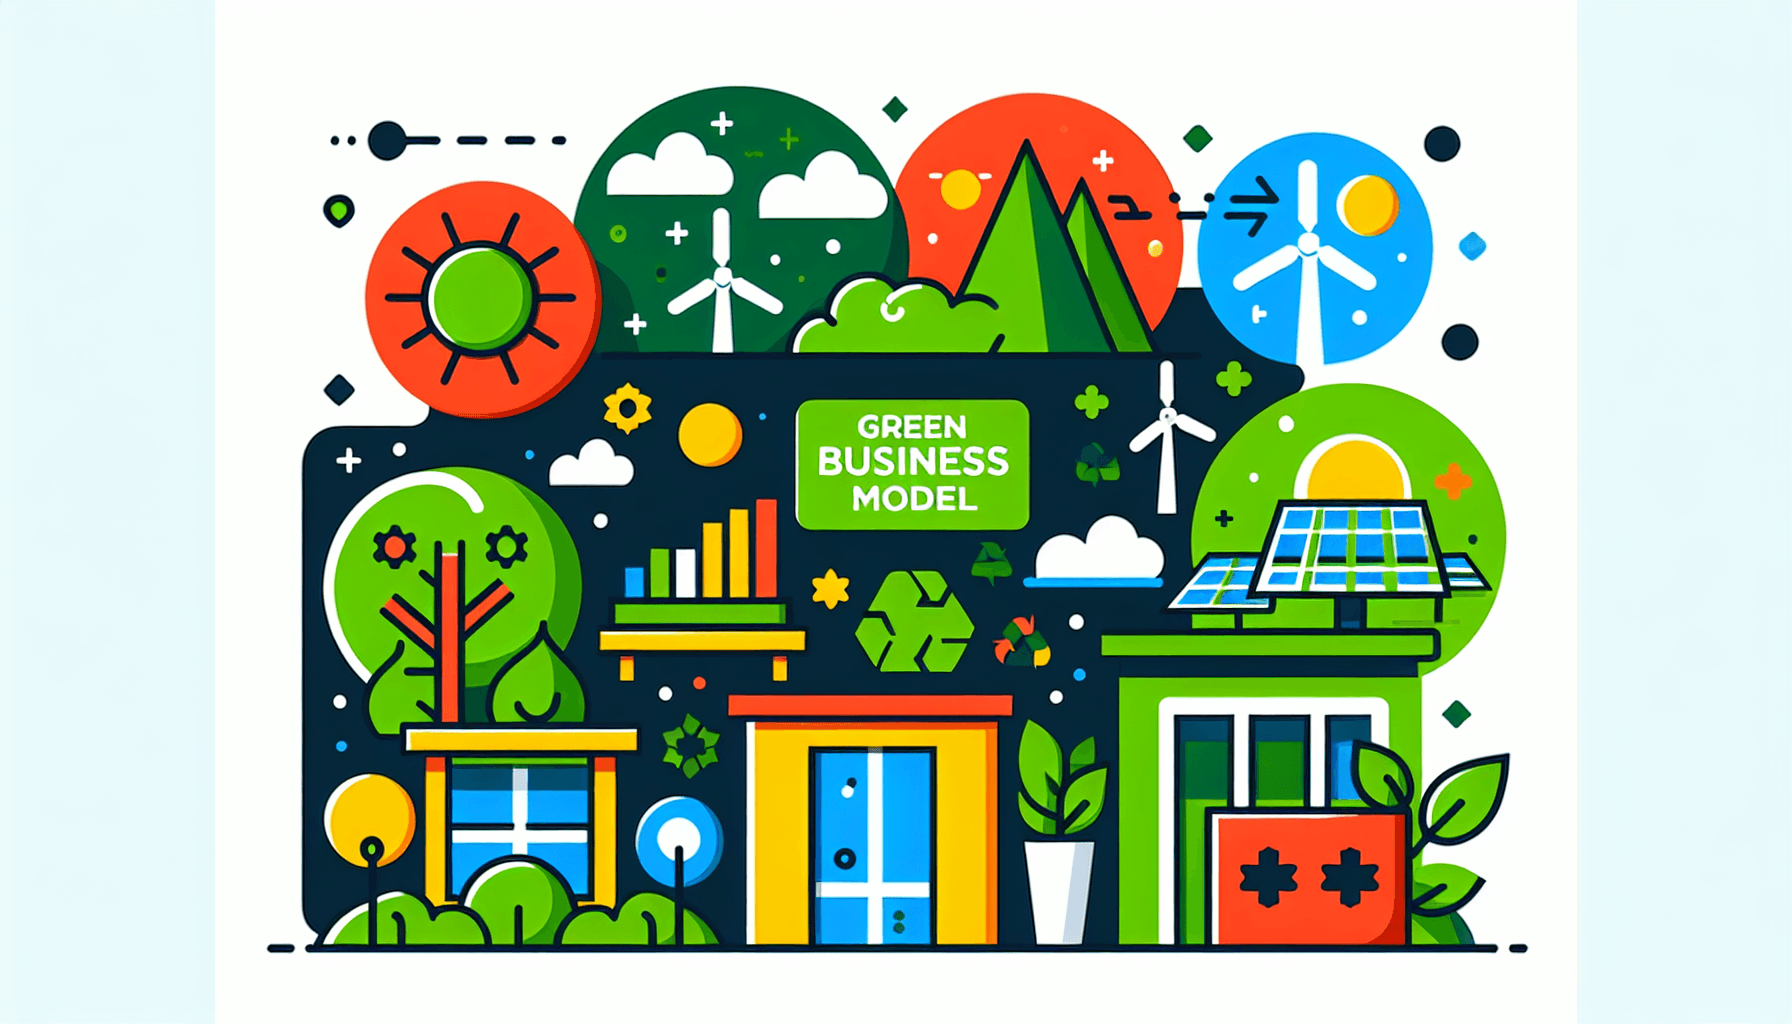 What is green business models? in flat illustration style and white background, red #f47574, green #88c7a8, yellow #fcc44b, and blue #645bc8 colors.